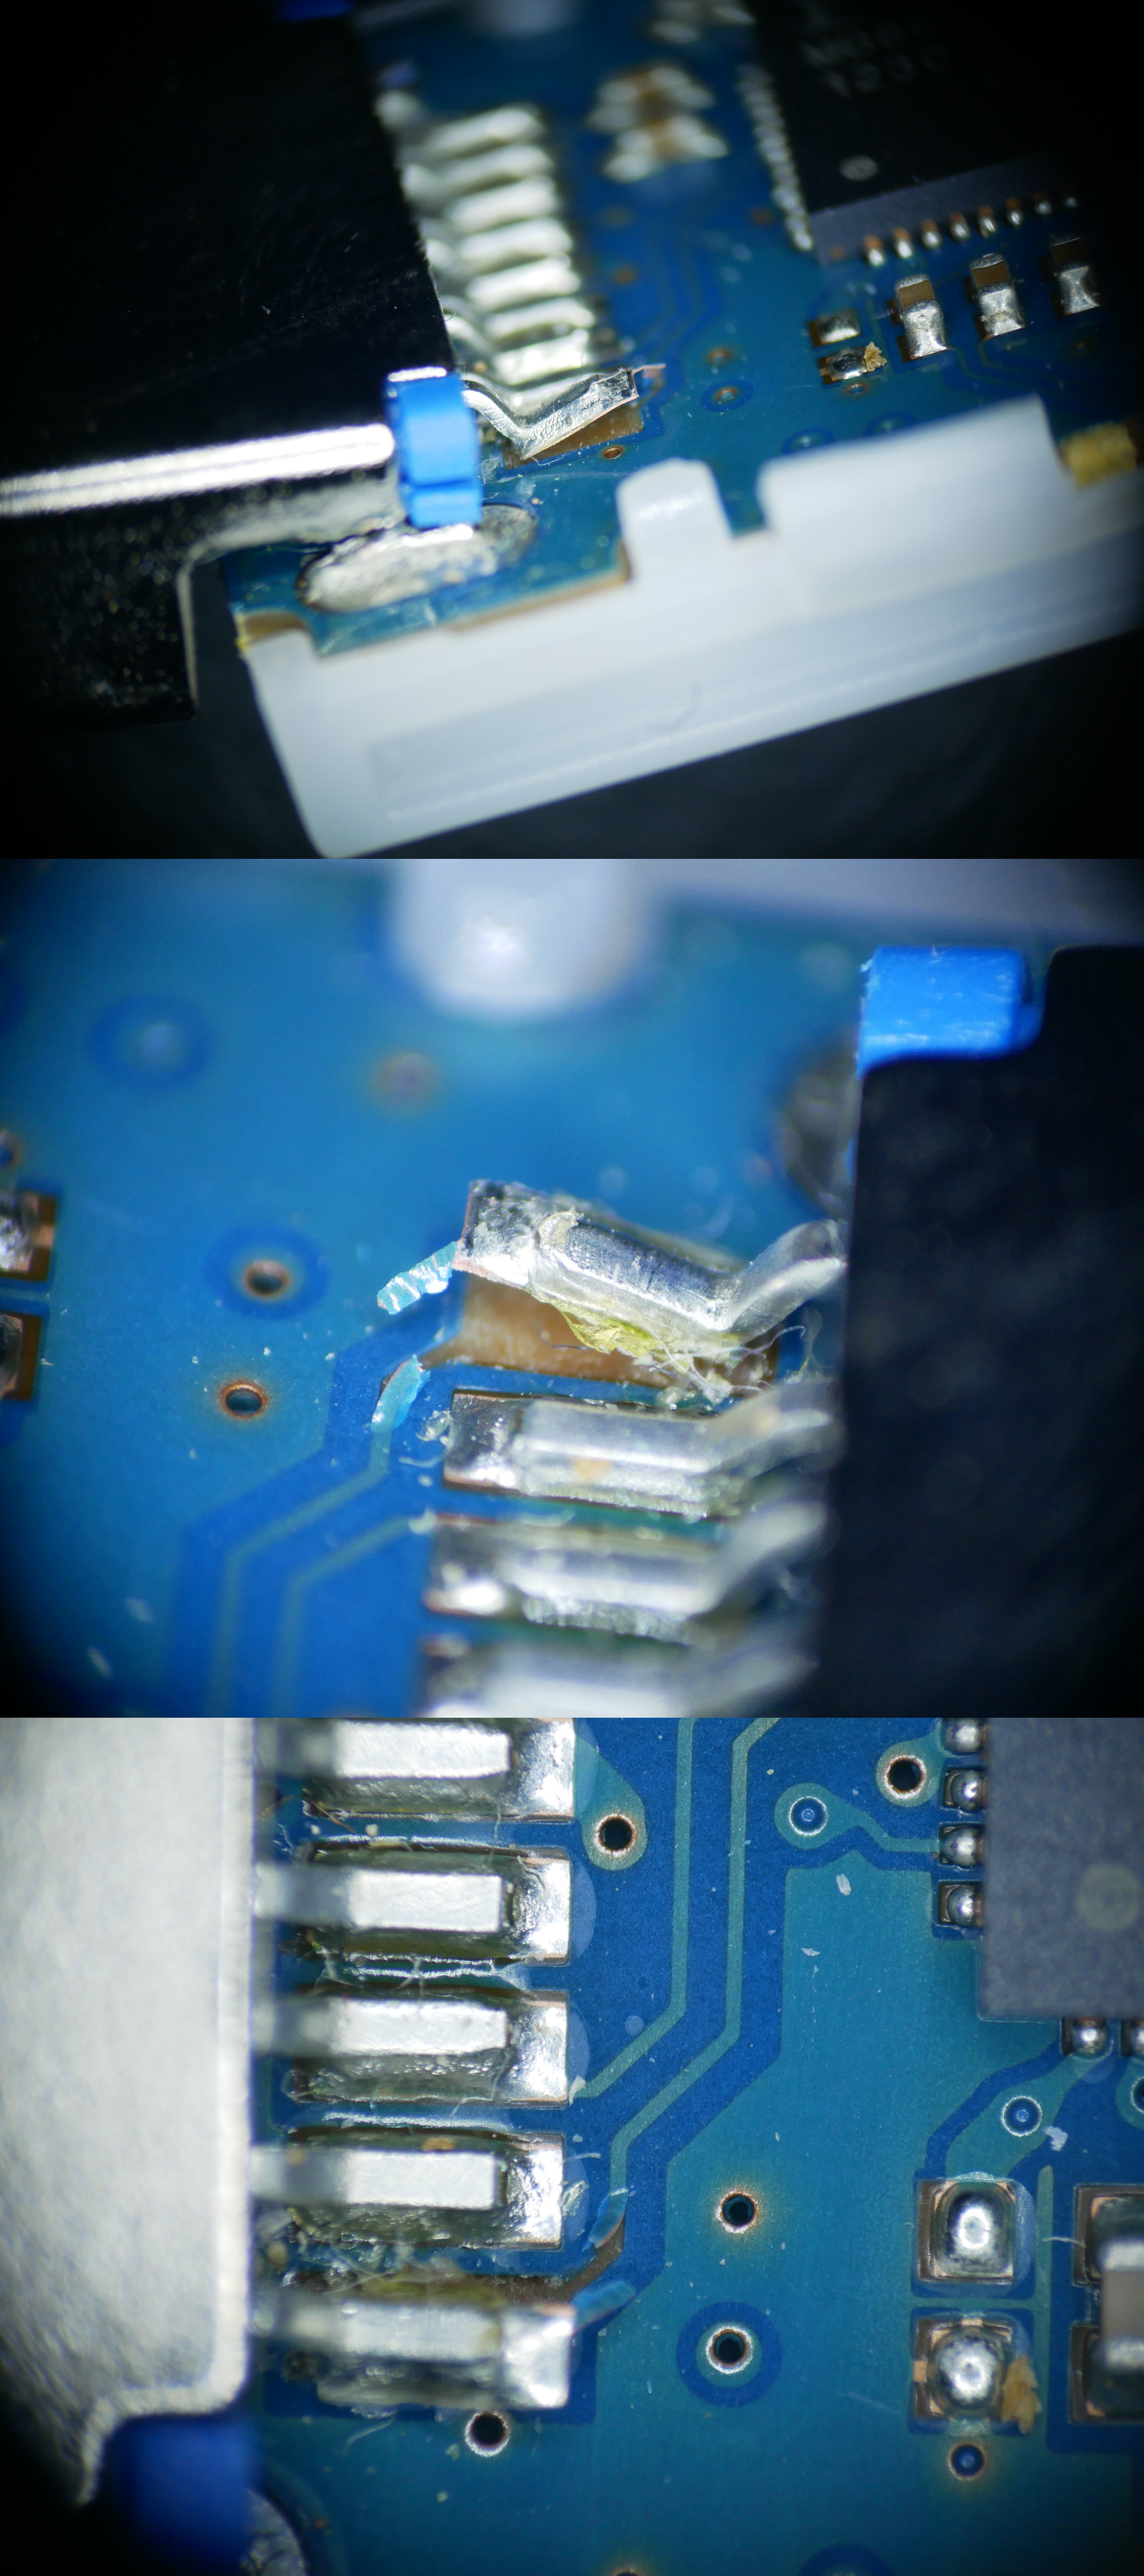 Close up of the damage - bent solder pin of the USB plug with track lifted off the board